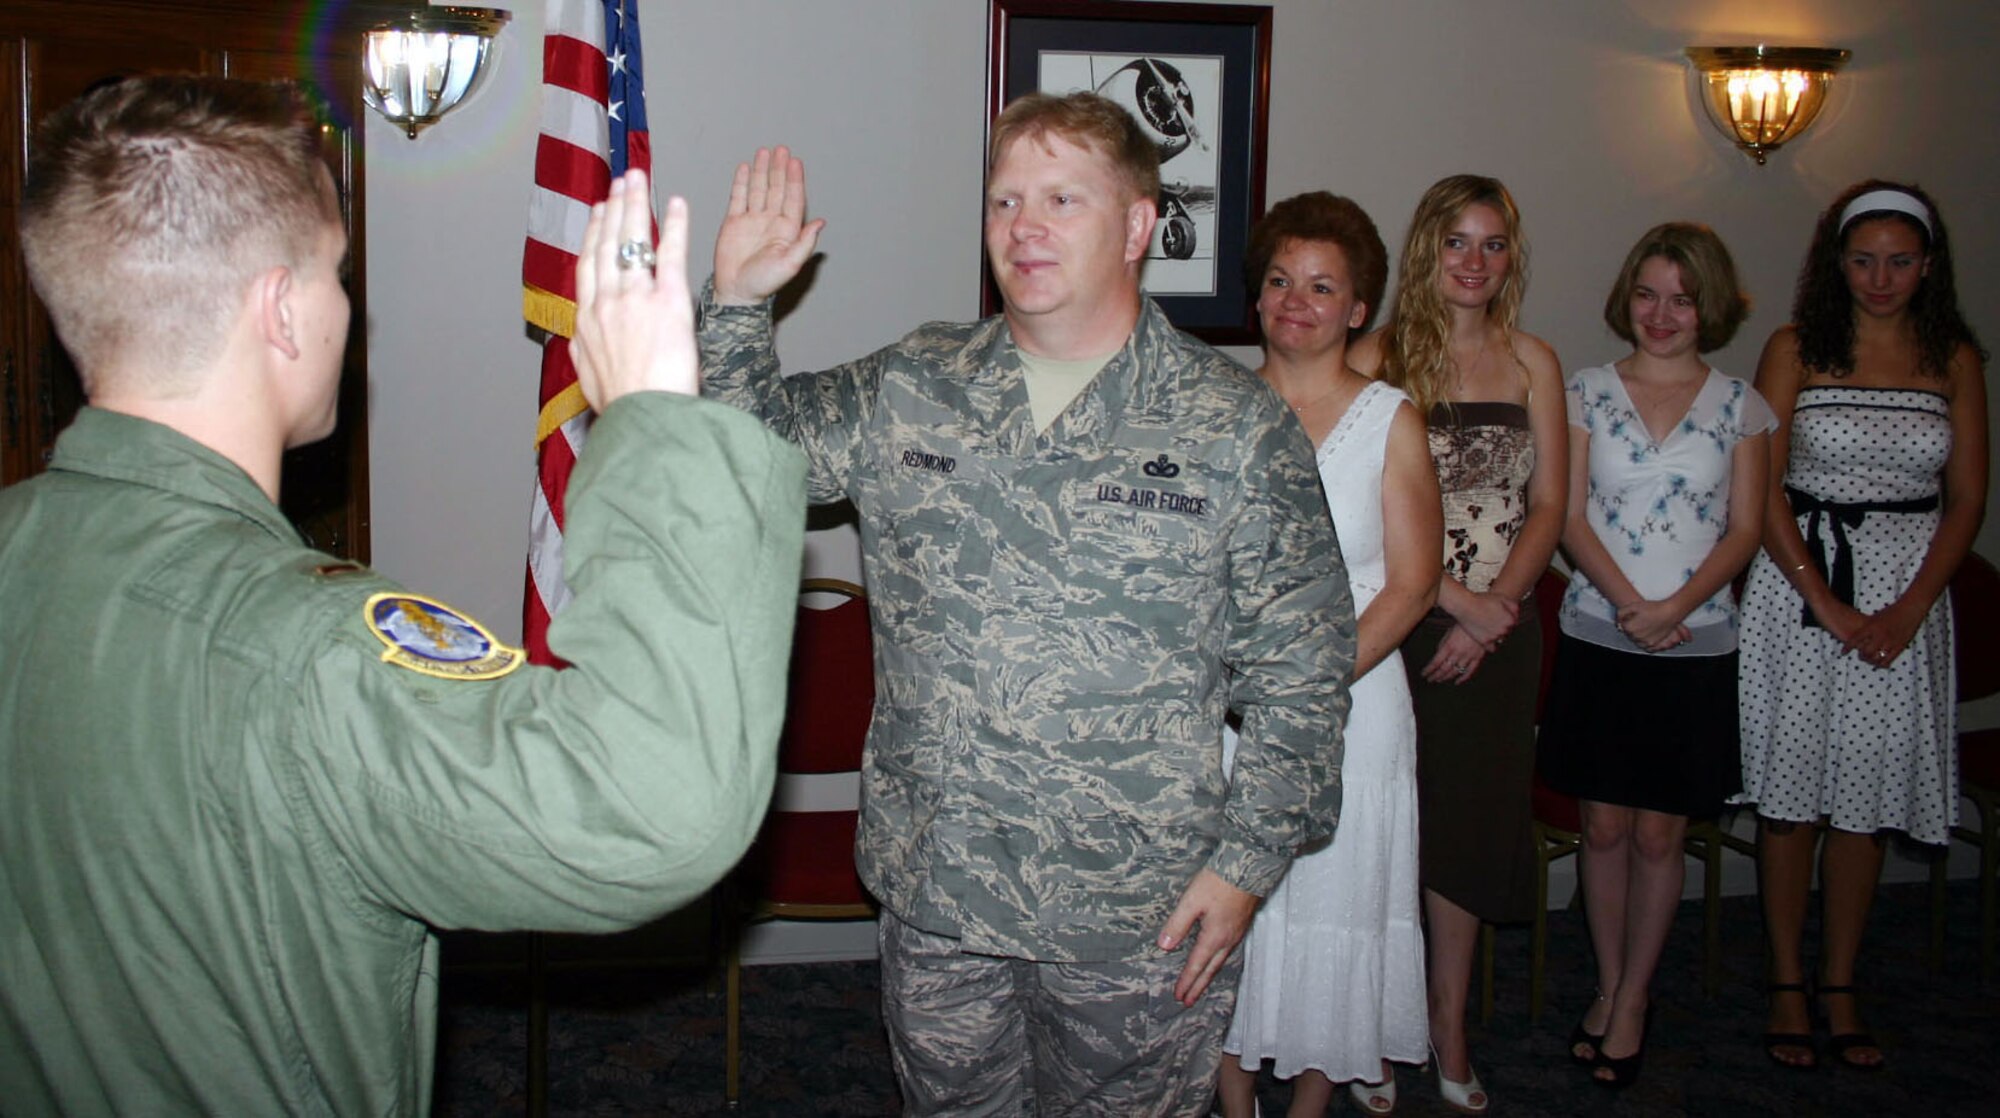 LAUGHLIN AIR FORCE BASE, Texas -- Chief Master Sgt. Chris Redmond, command chief for Air Force Office of Special Investigations, raises his hand and repeats after swear his oldest son, 24-year-old 2nd Lt. Chris Redmond the 85th Flying Training Squadron, while family watches recently. 